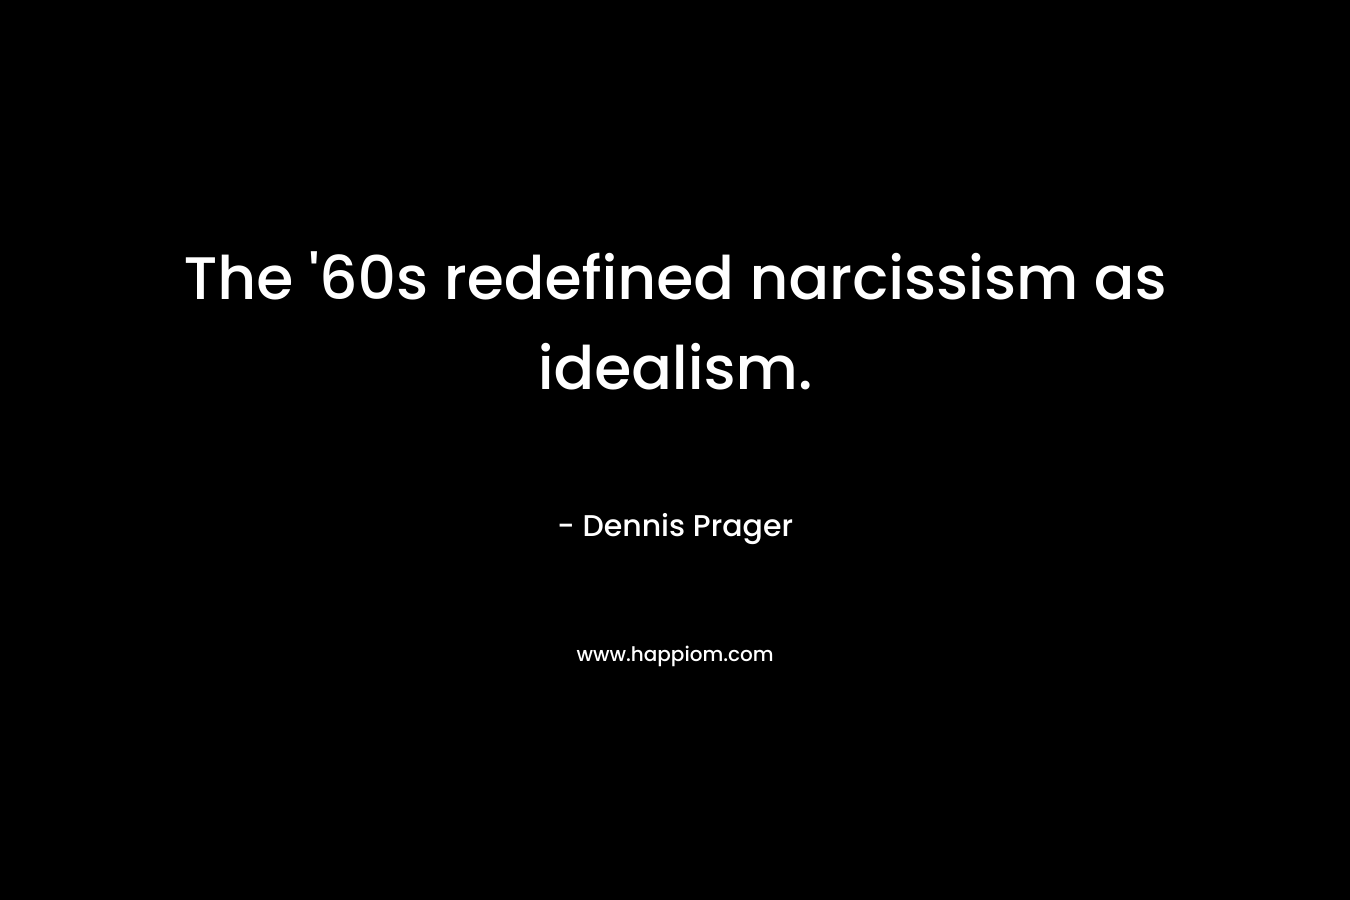 The '60s redefined narcissism as idealism.